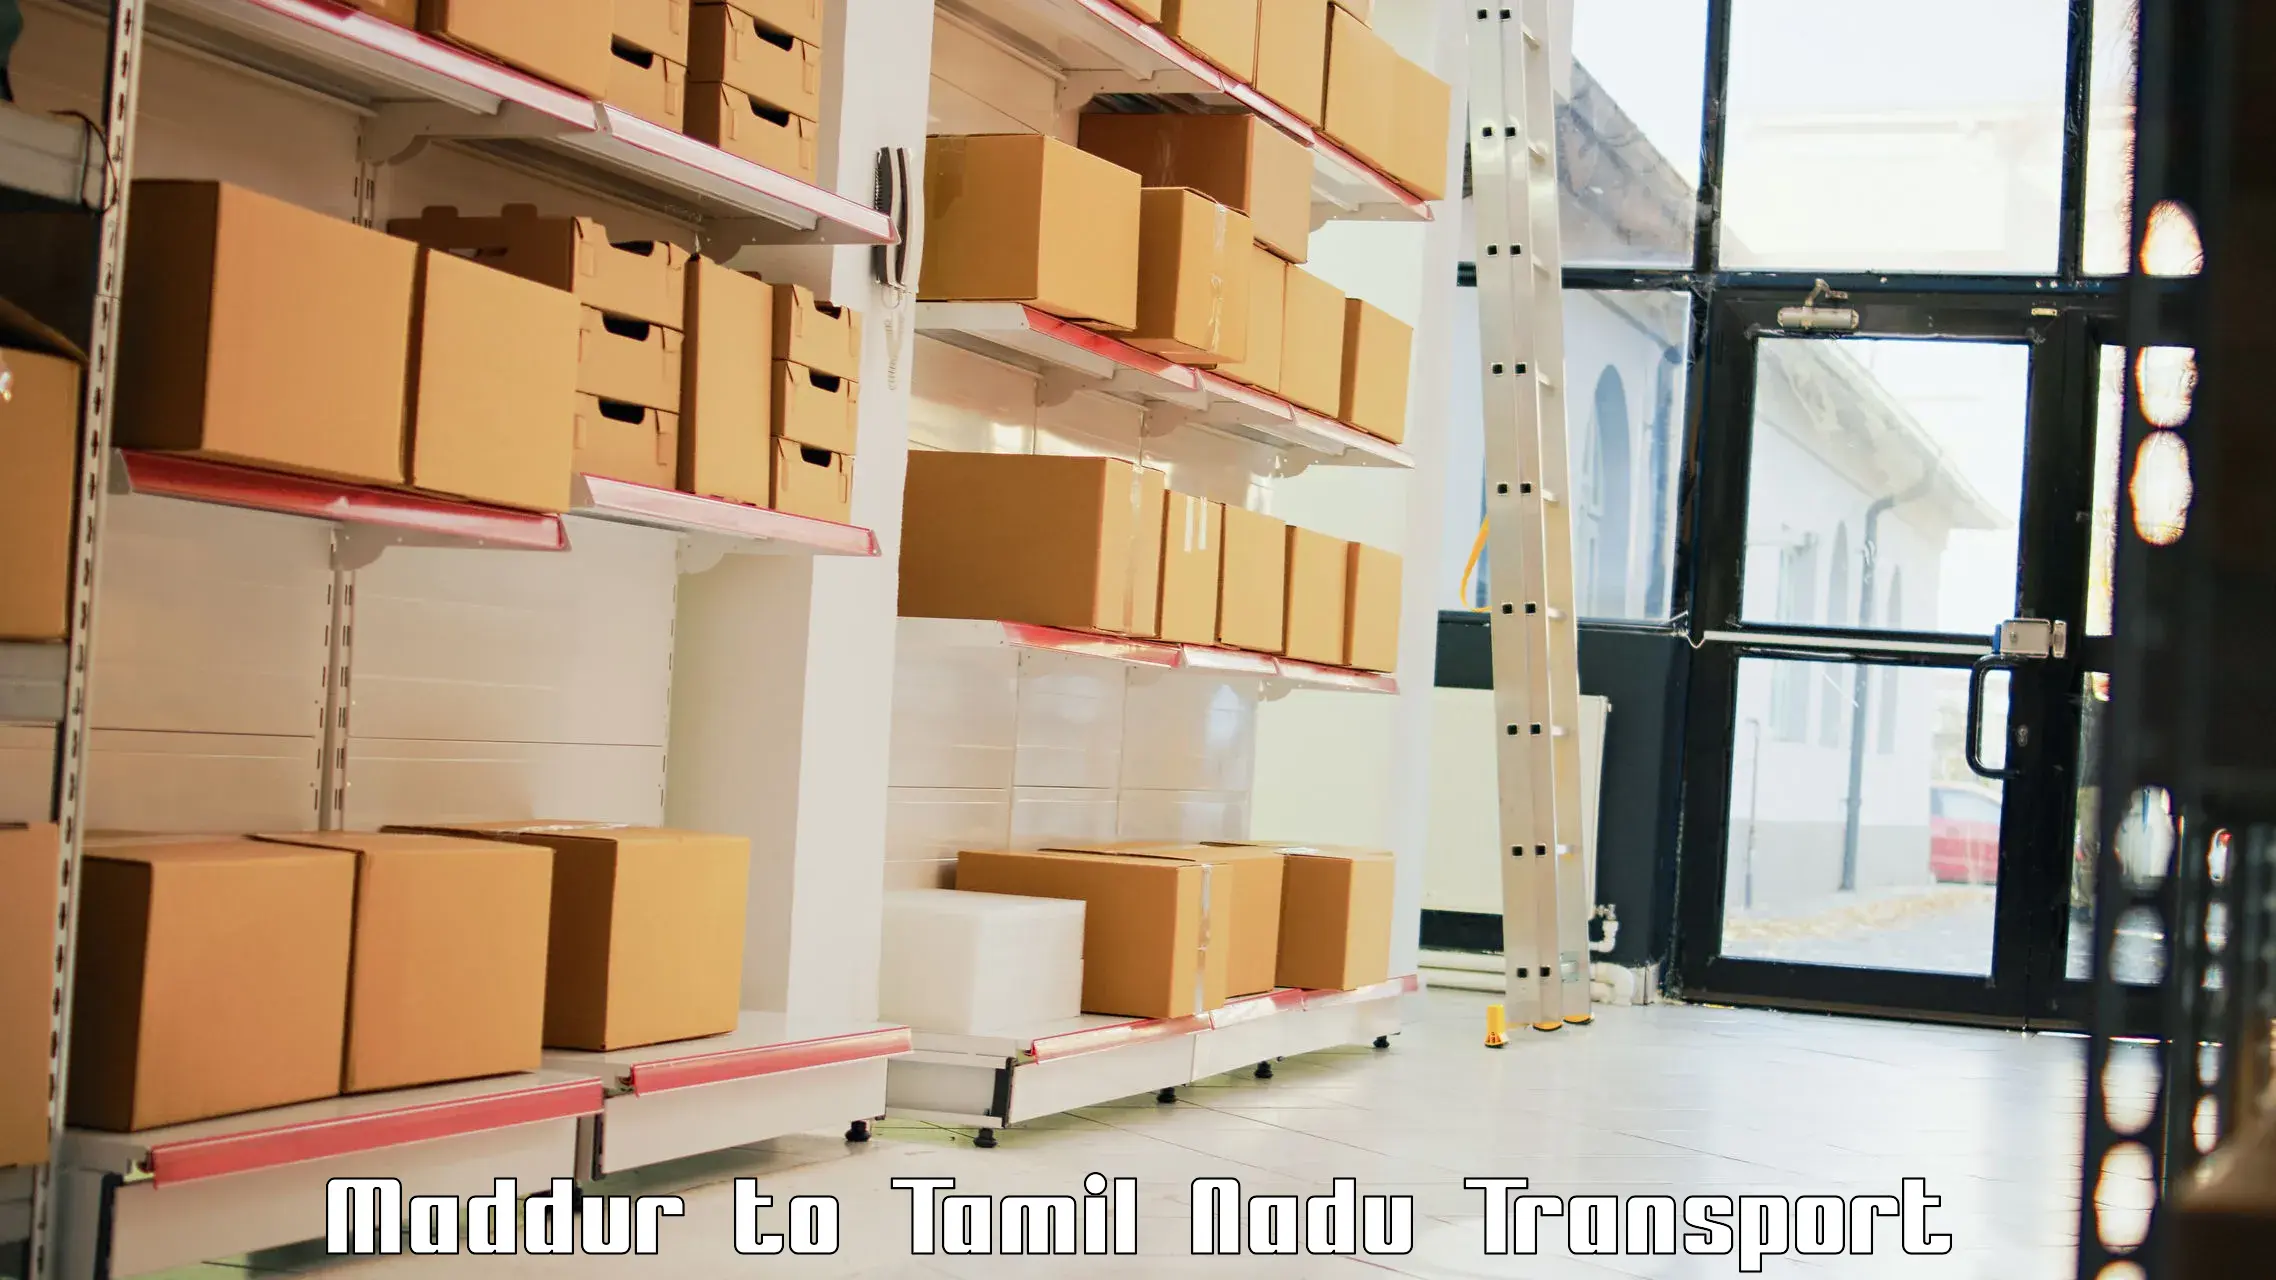 Part load transport service in India Maddur to Ennore Port Chennai